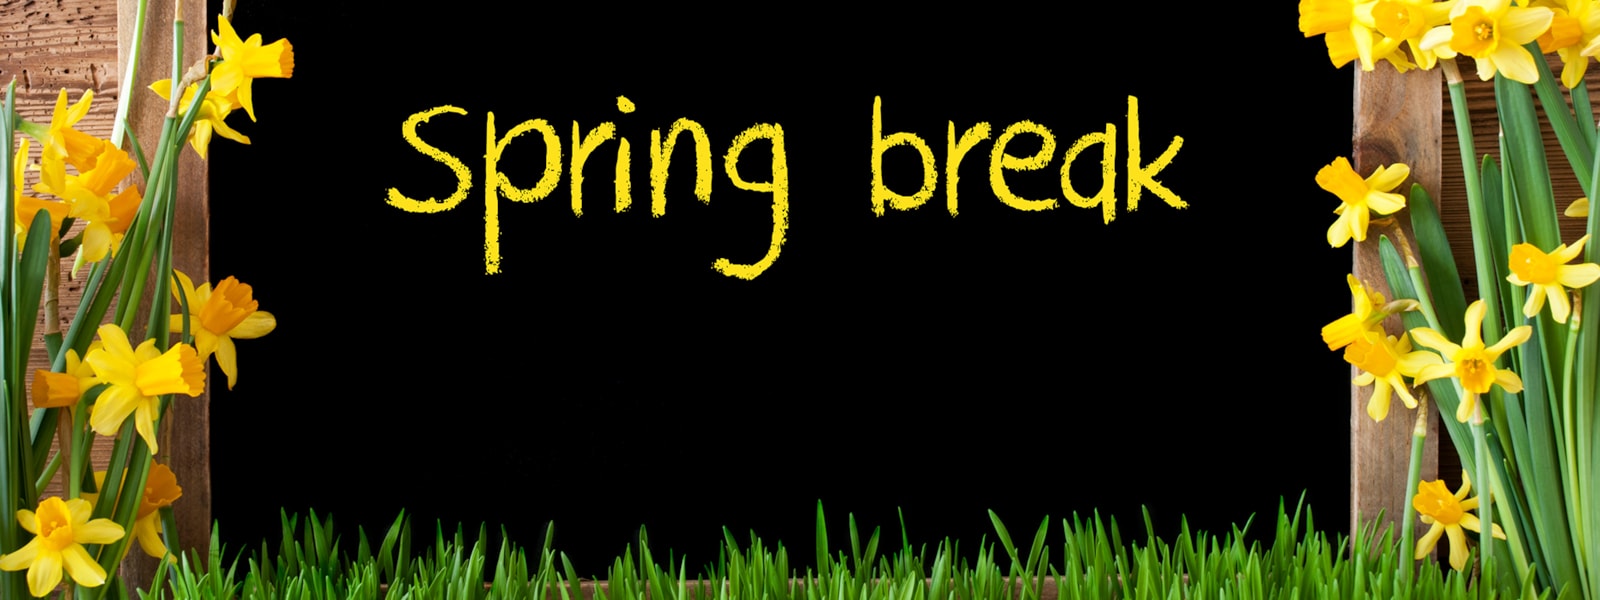 black background with grass and daffodils surrounding 'spring break'